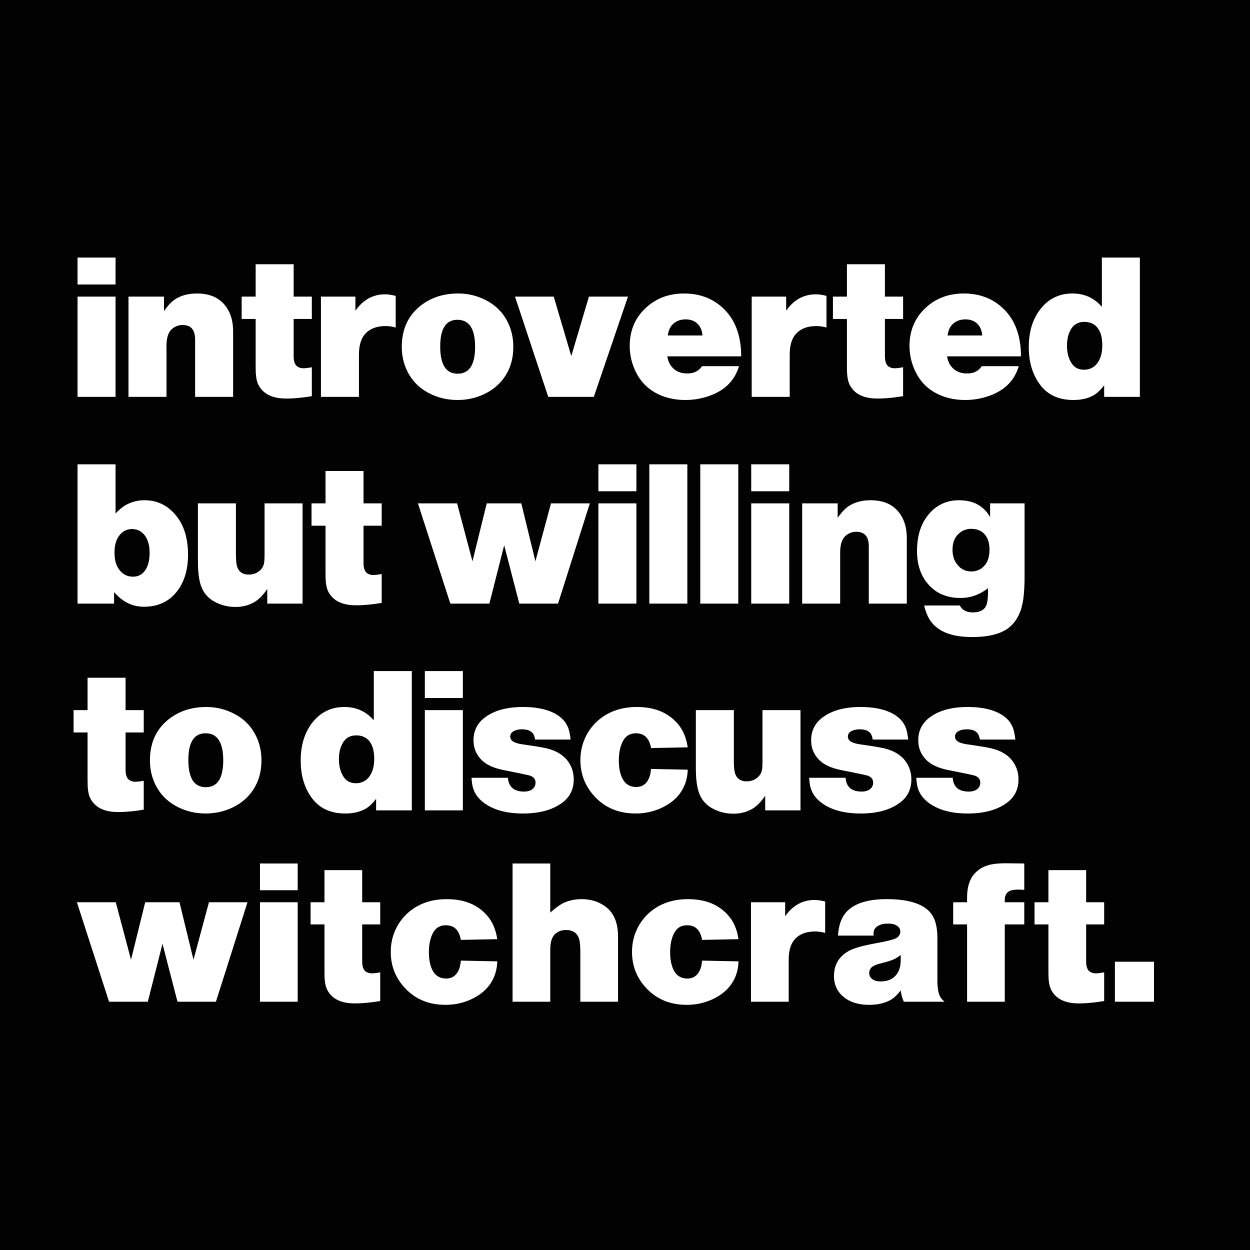 Introverted But Willing To Discuss Witchcraft Tshirt - Donkey Tees